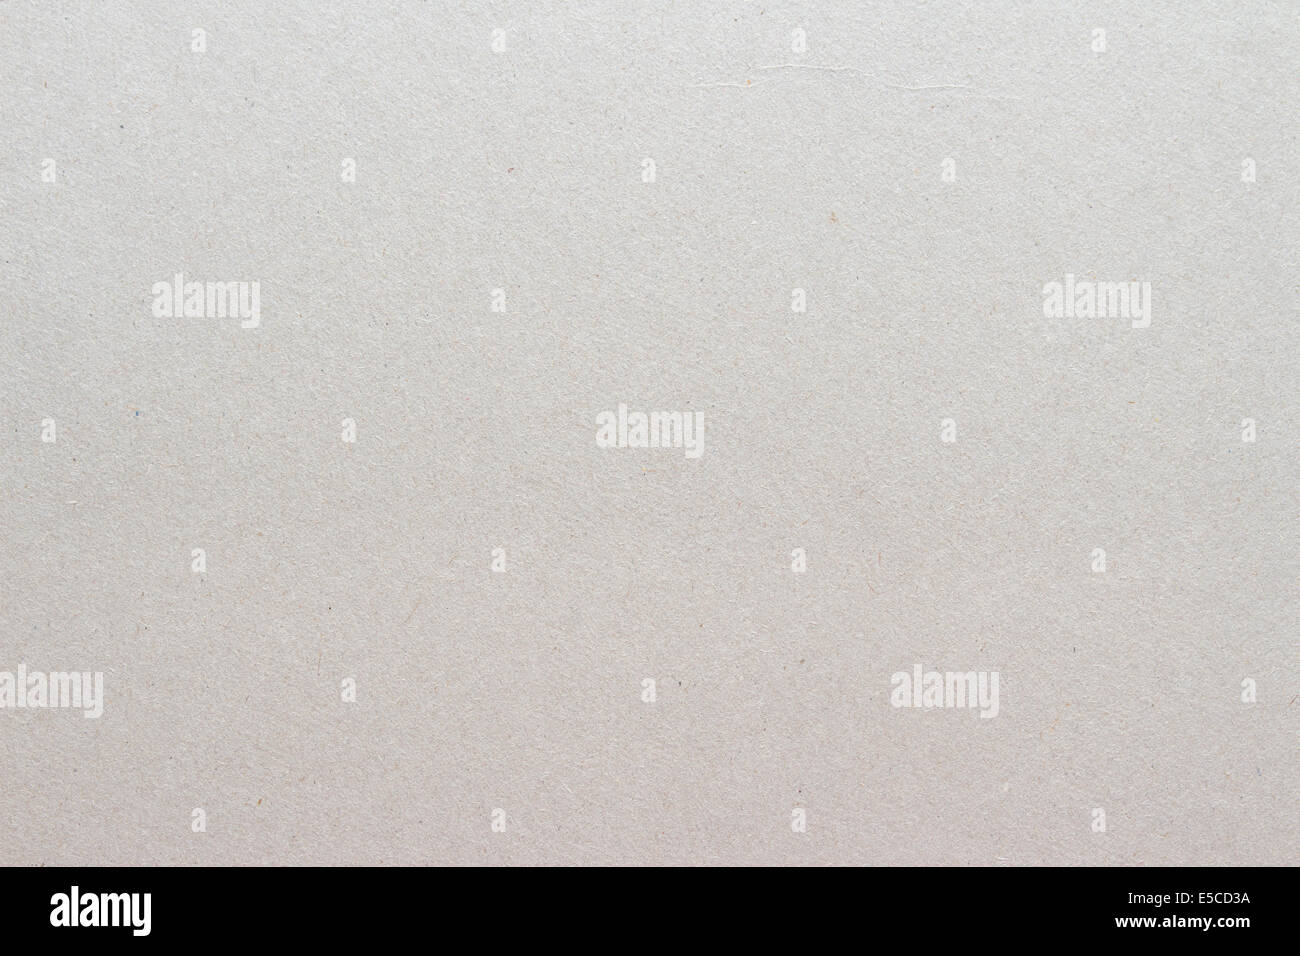 Paper texture, cardboard background, close-up Stock Photo